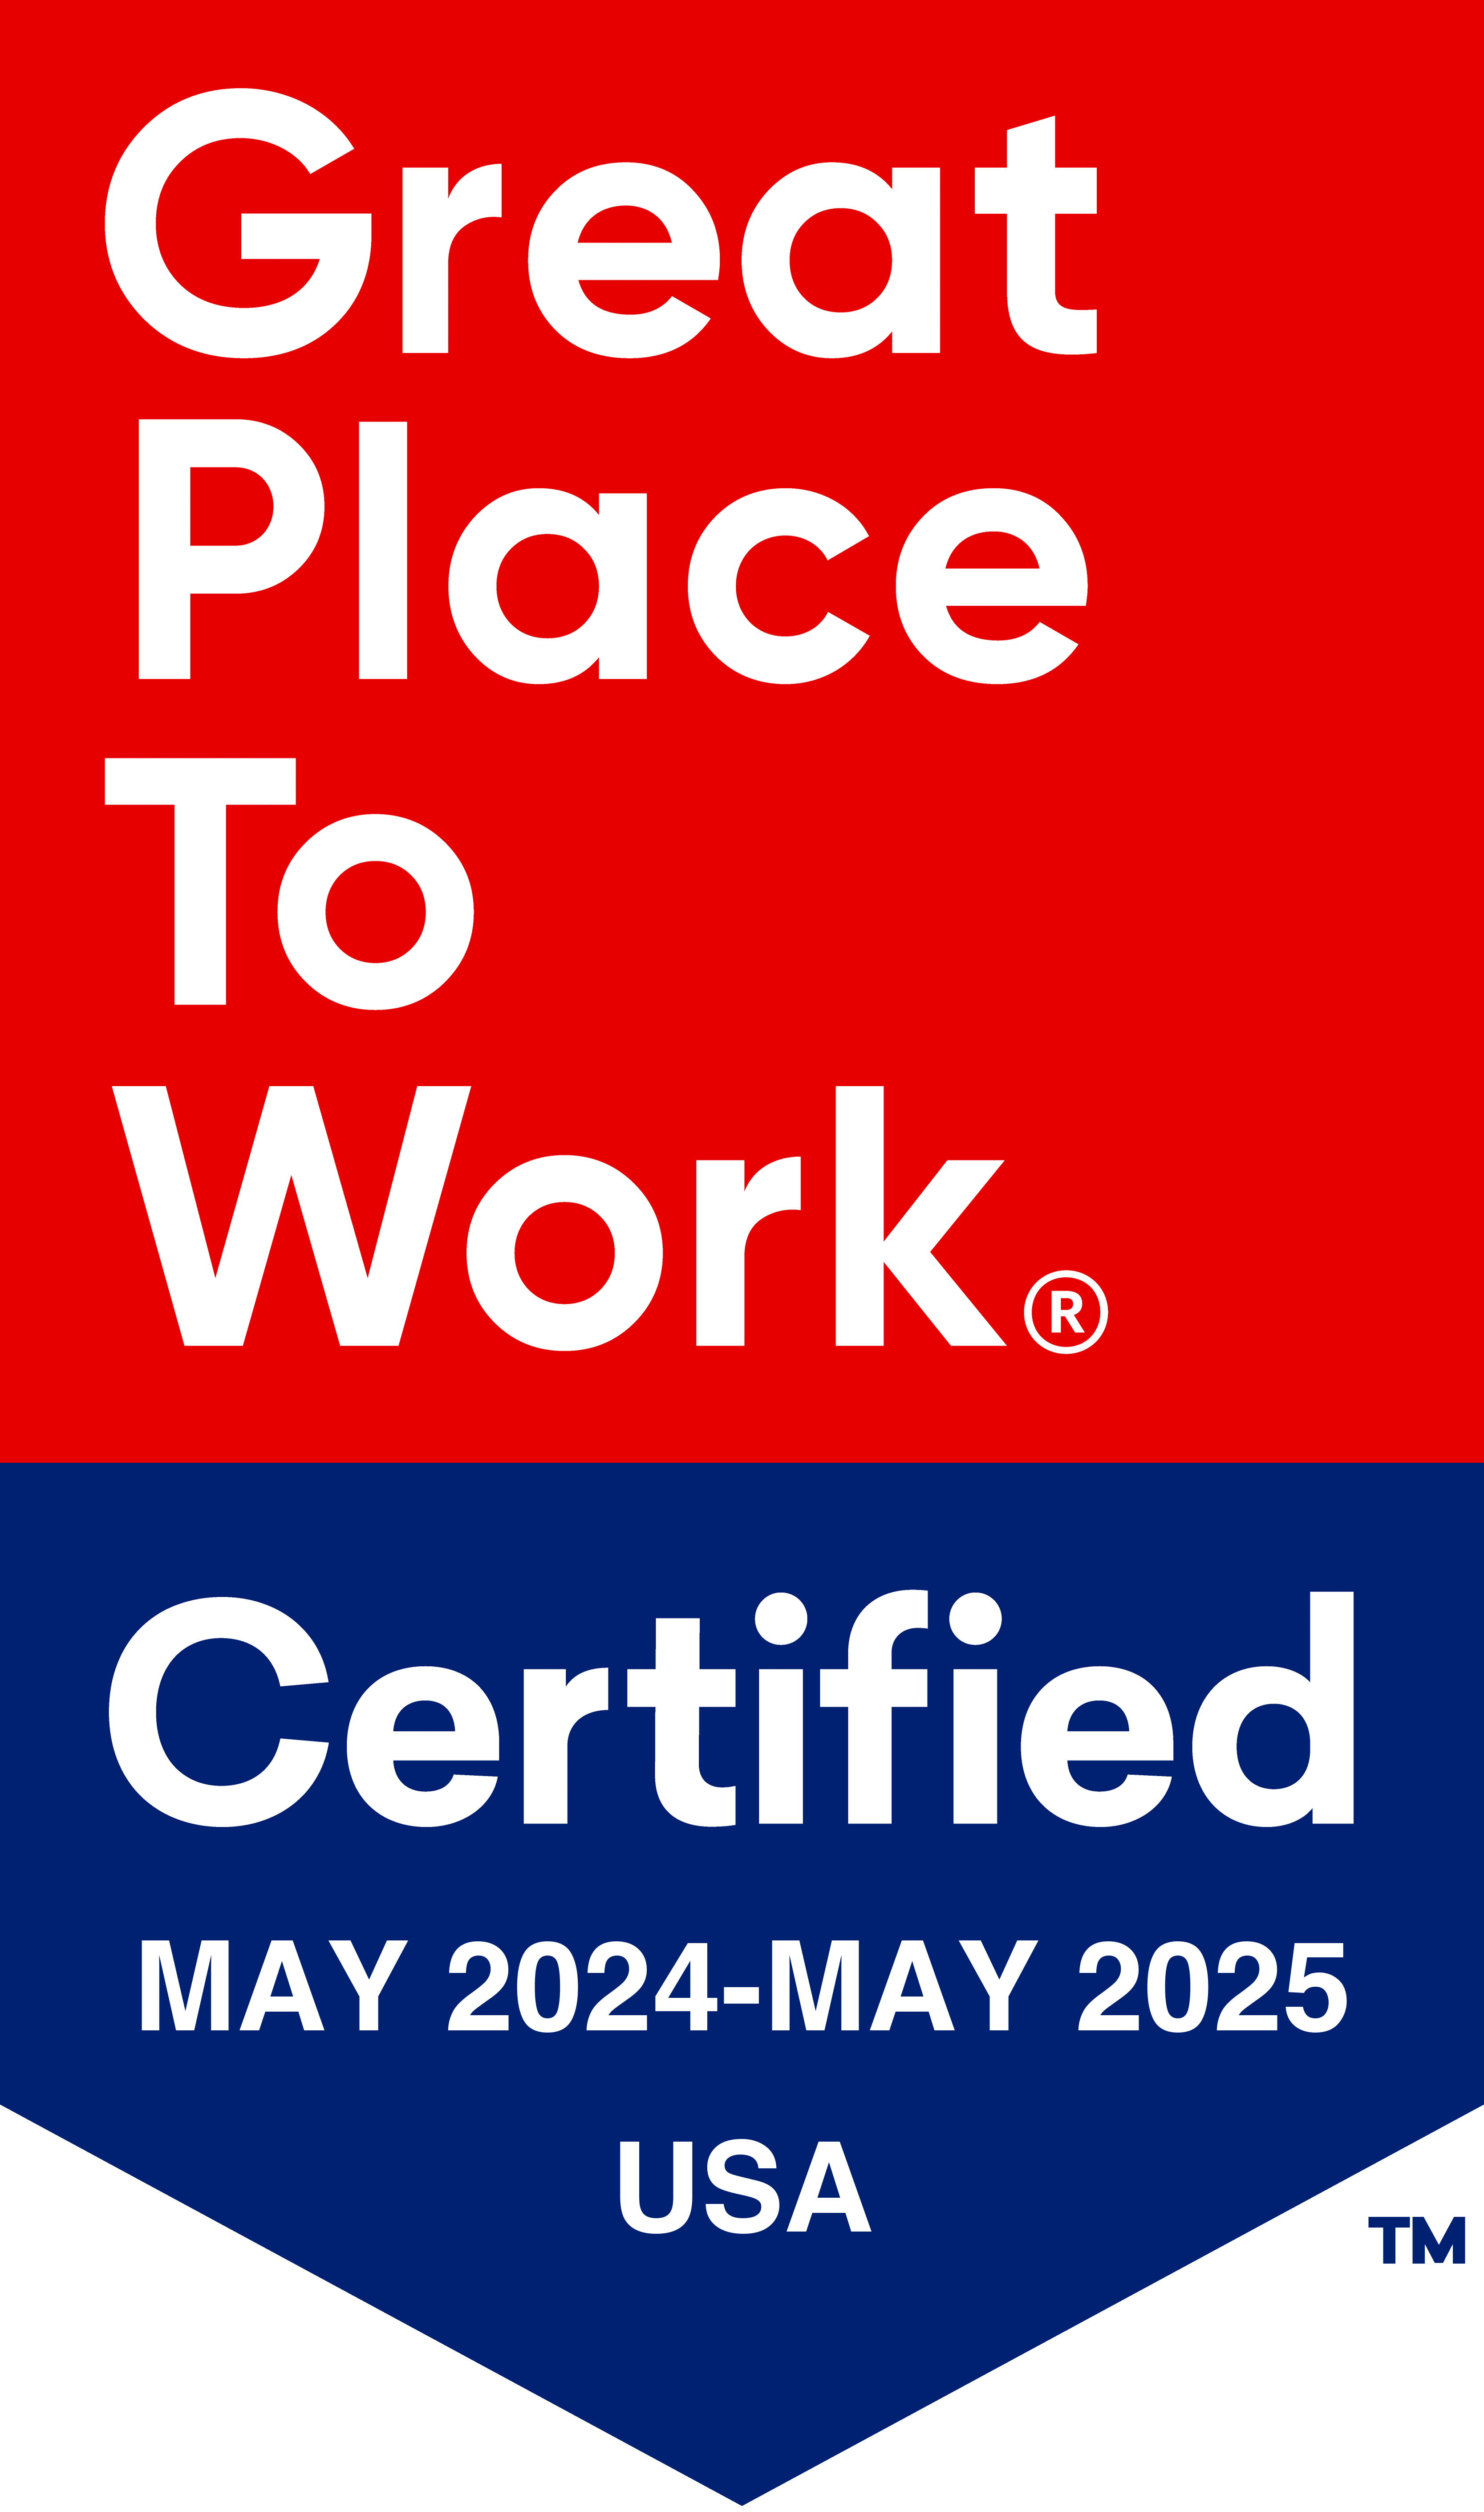 Great Place to work winner